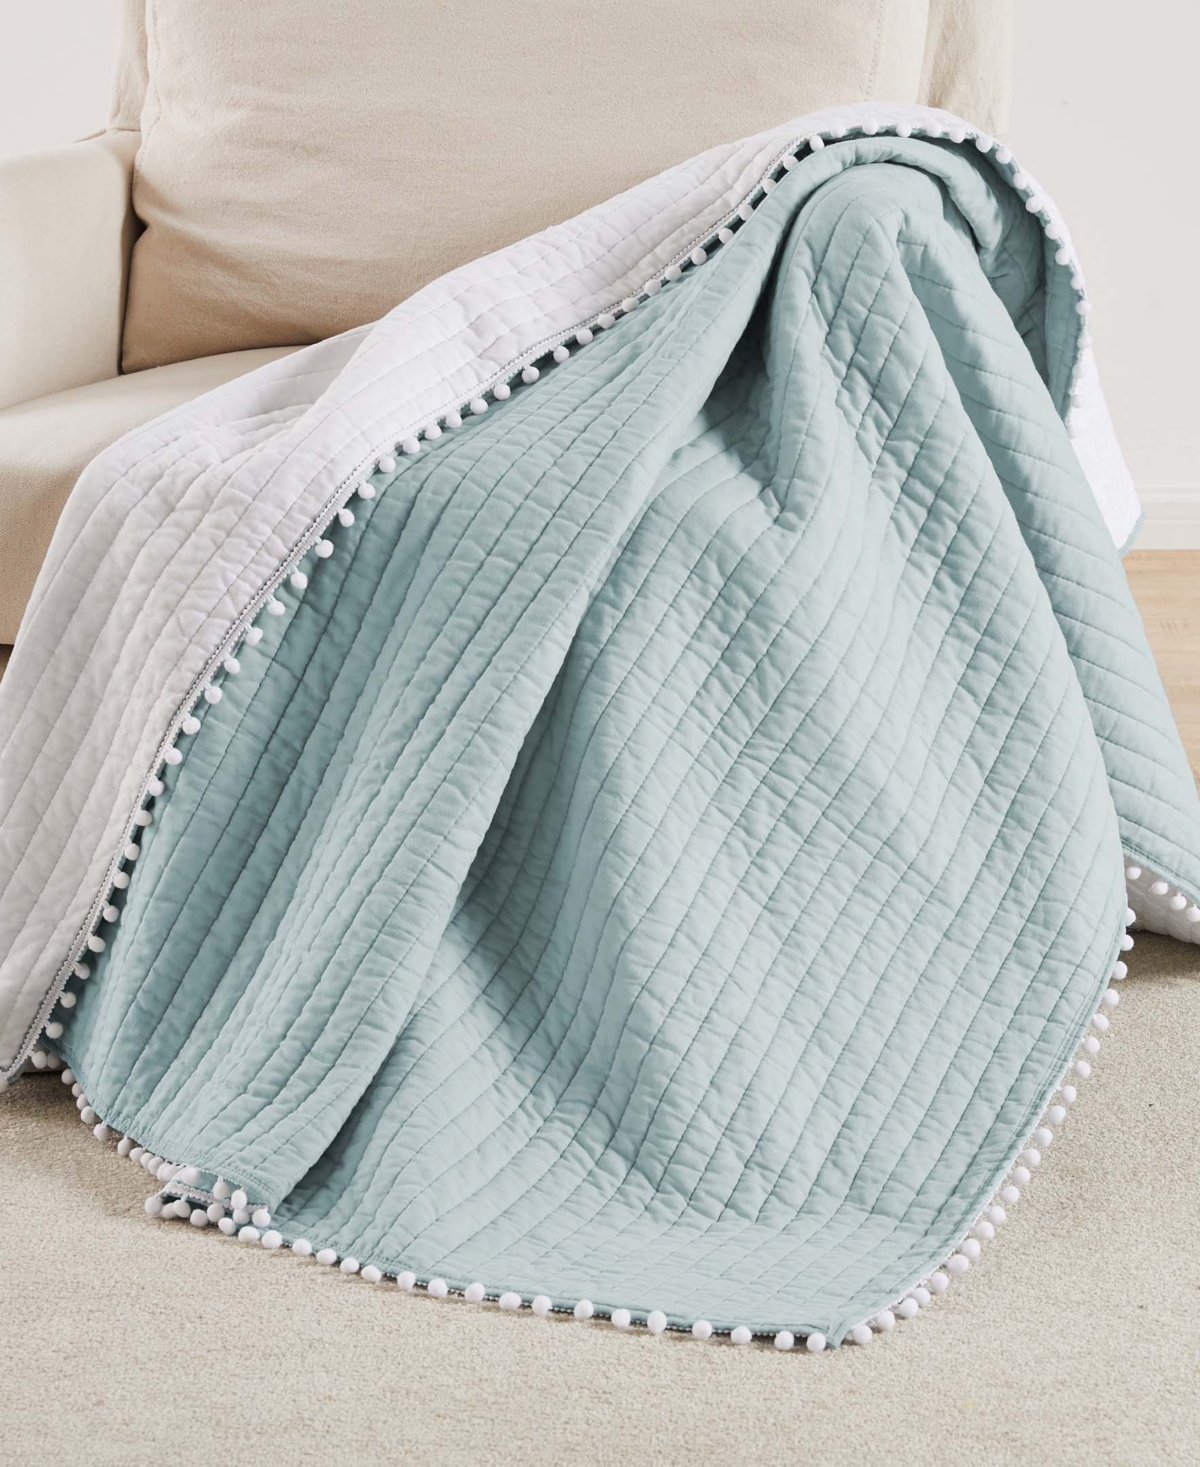 Levtex Pom Pom Reversible Quilted Throw, 50" X 60" In Blue Haze